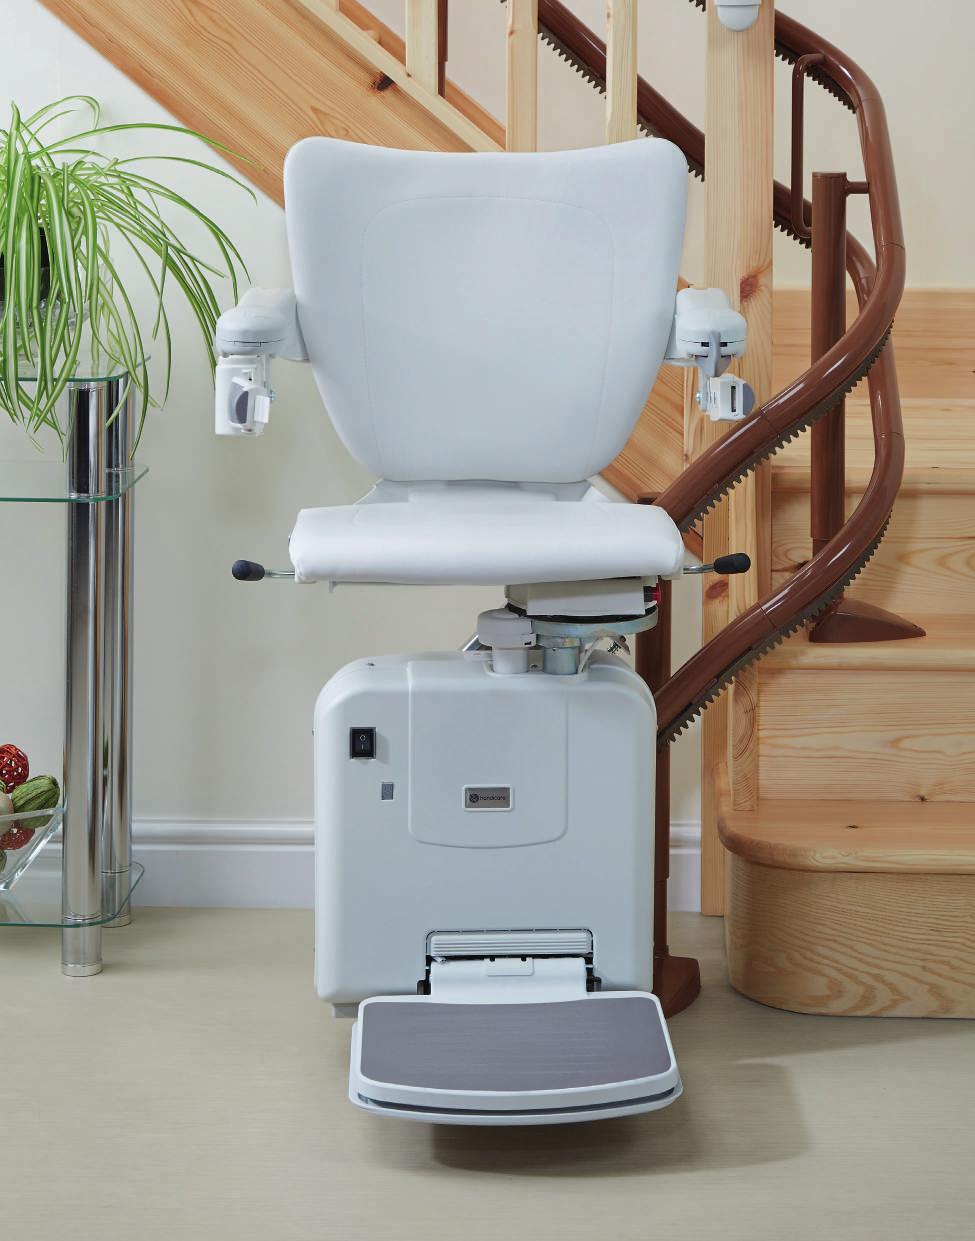 Style Seat and Handicare 2000 Twin rail curved stairlift Handicare s Style seat allows you to combine the 2000 curved track system with optional powered features to fold the footplate after use or